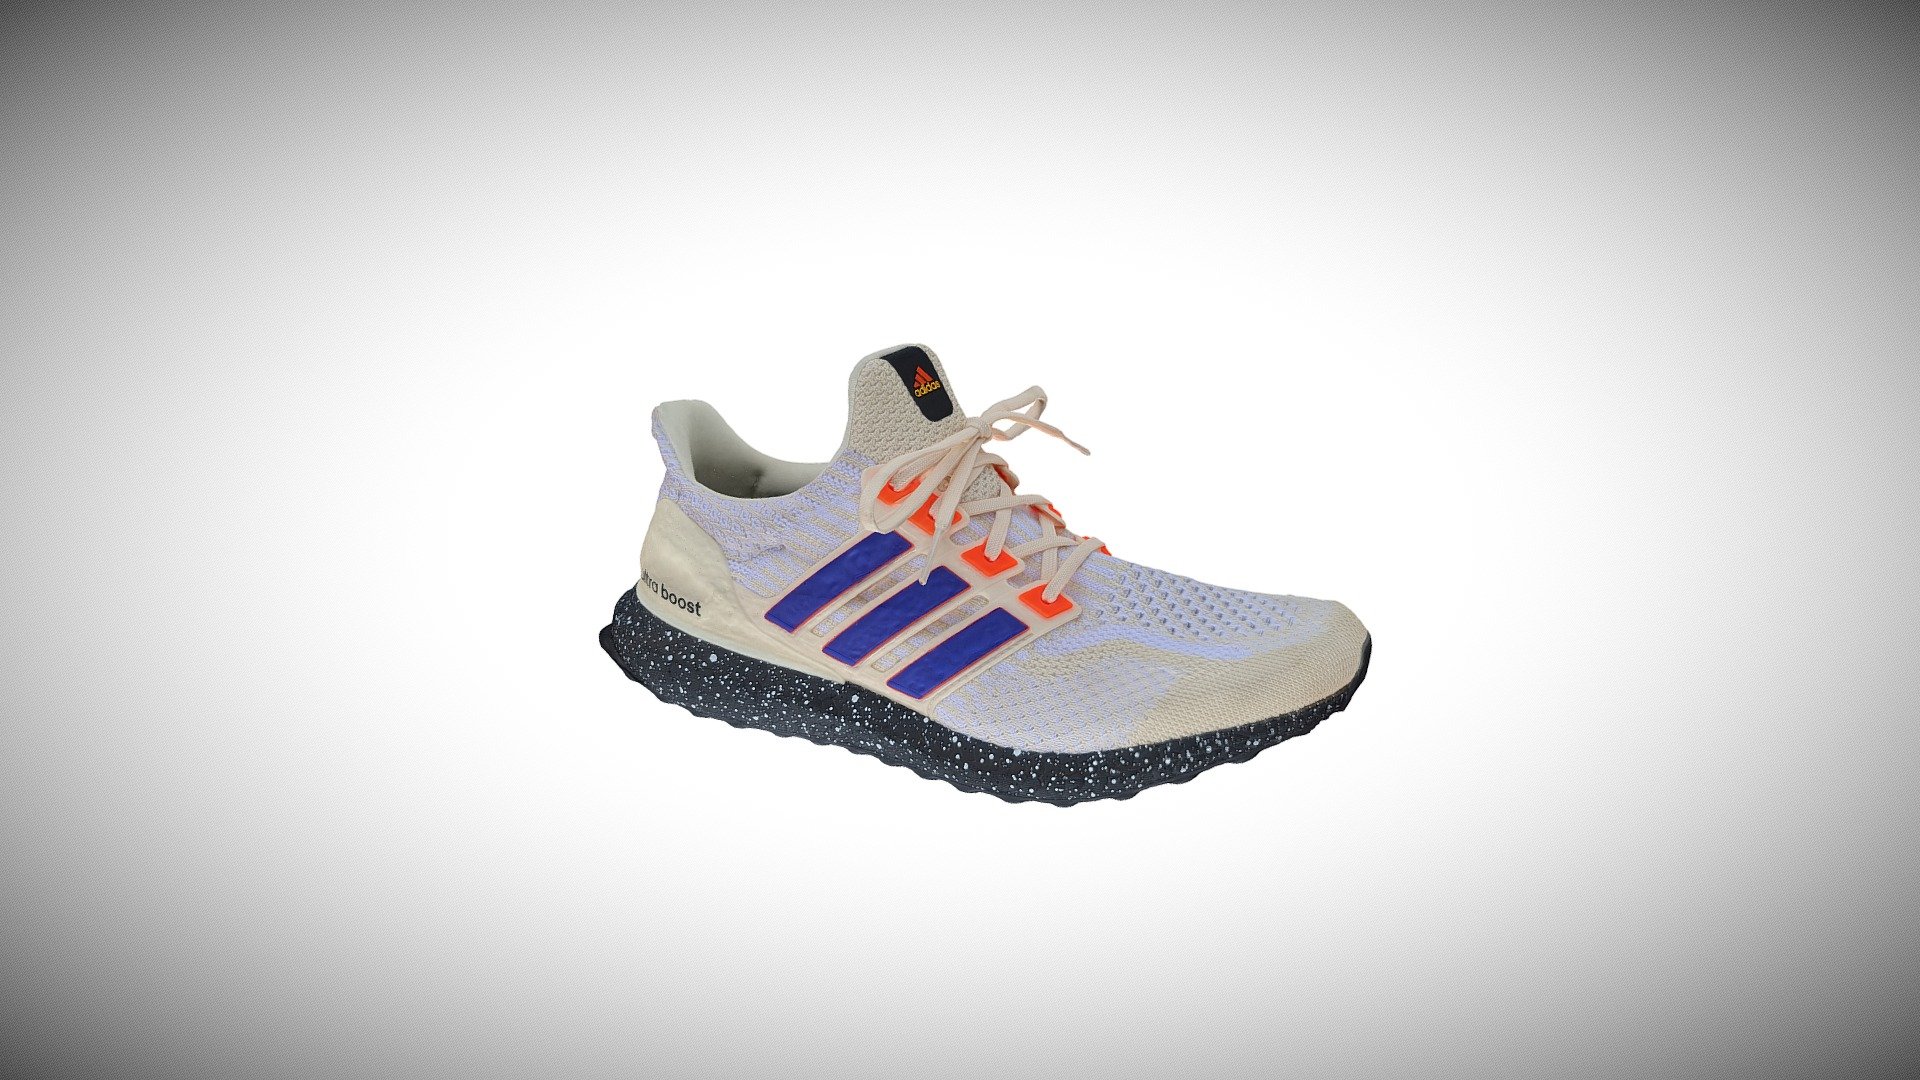 Photogrammetry of an Adidas Ultraboost DNA 5.0 sneaker using a Galaxy s20 Ultra and Reality Capture. 1 Million Triangles 3d model